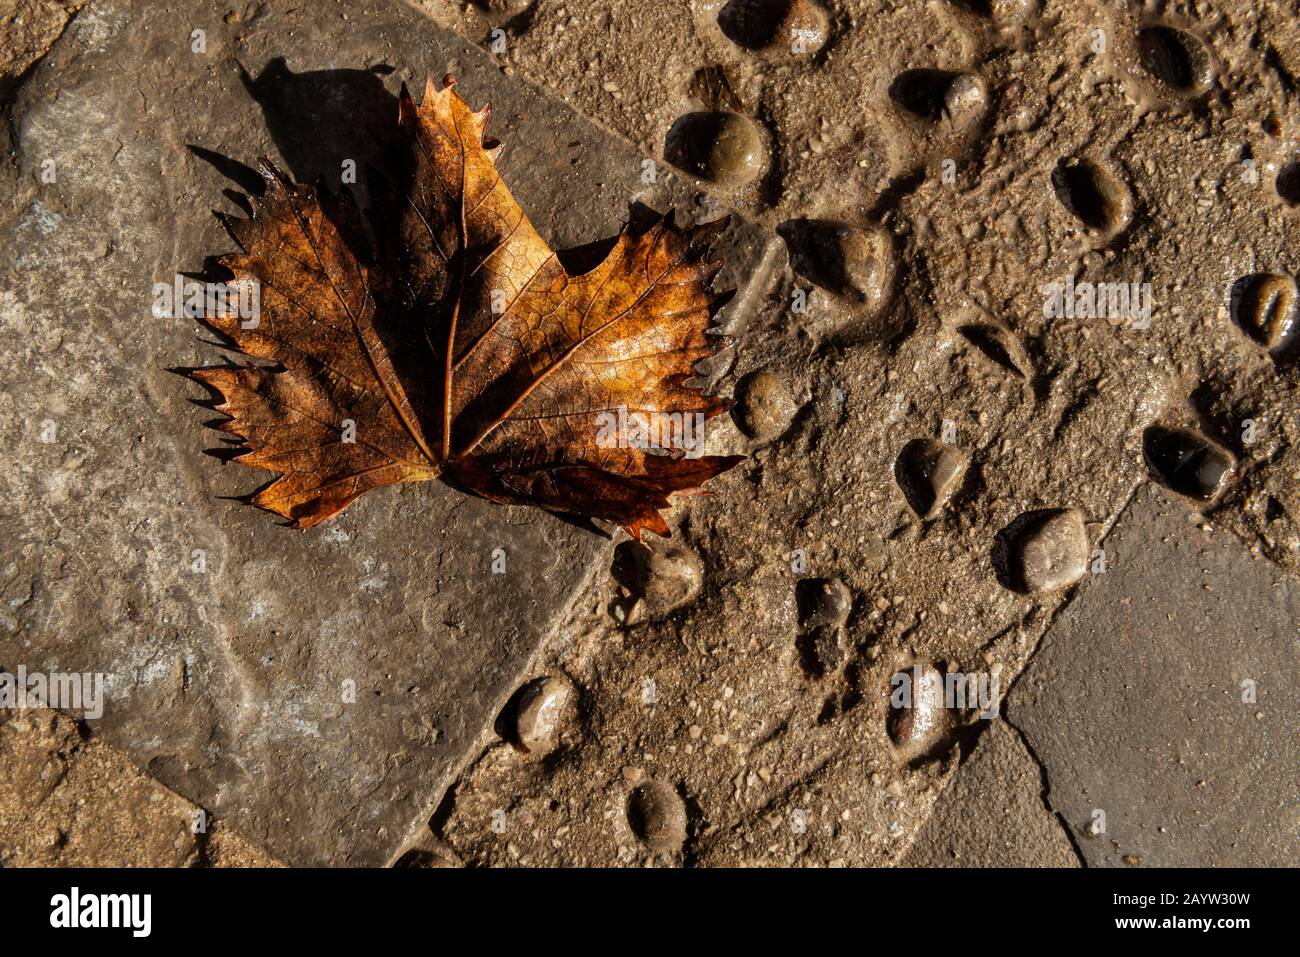 Old, wet, weathered maple leaf on stone ground after rain. Stock Photo